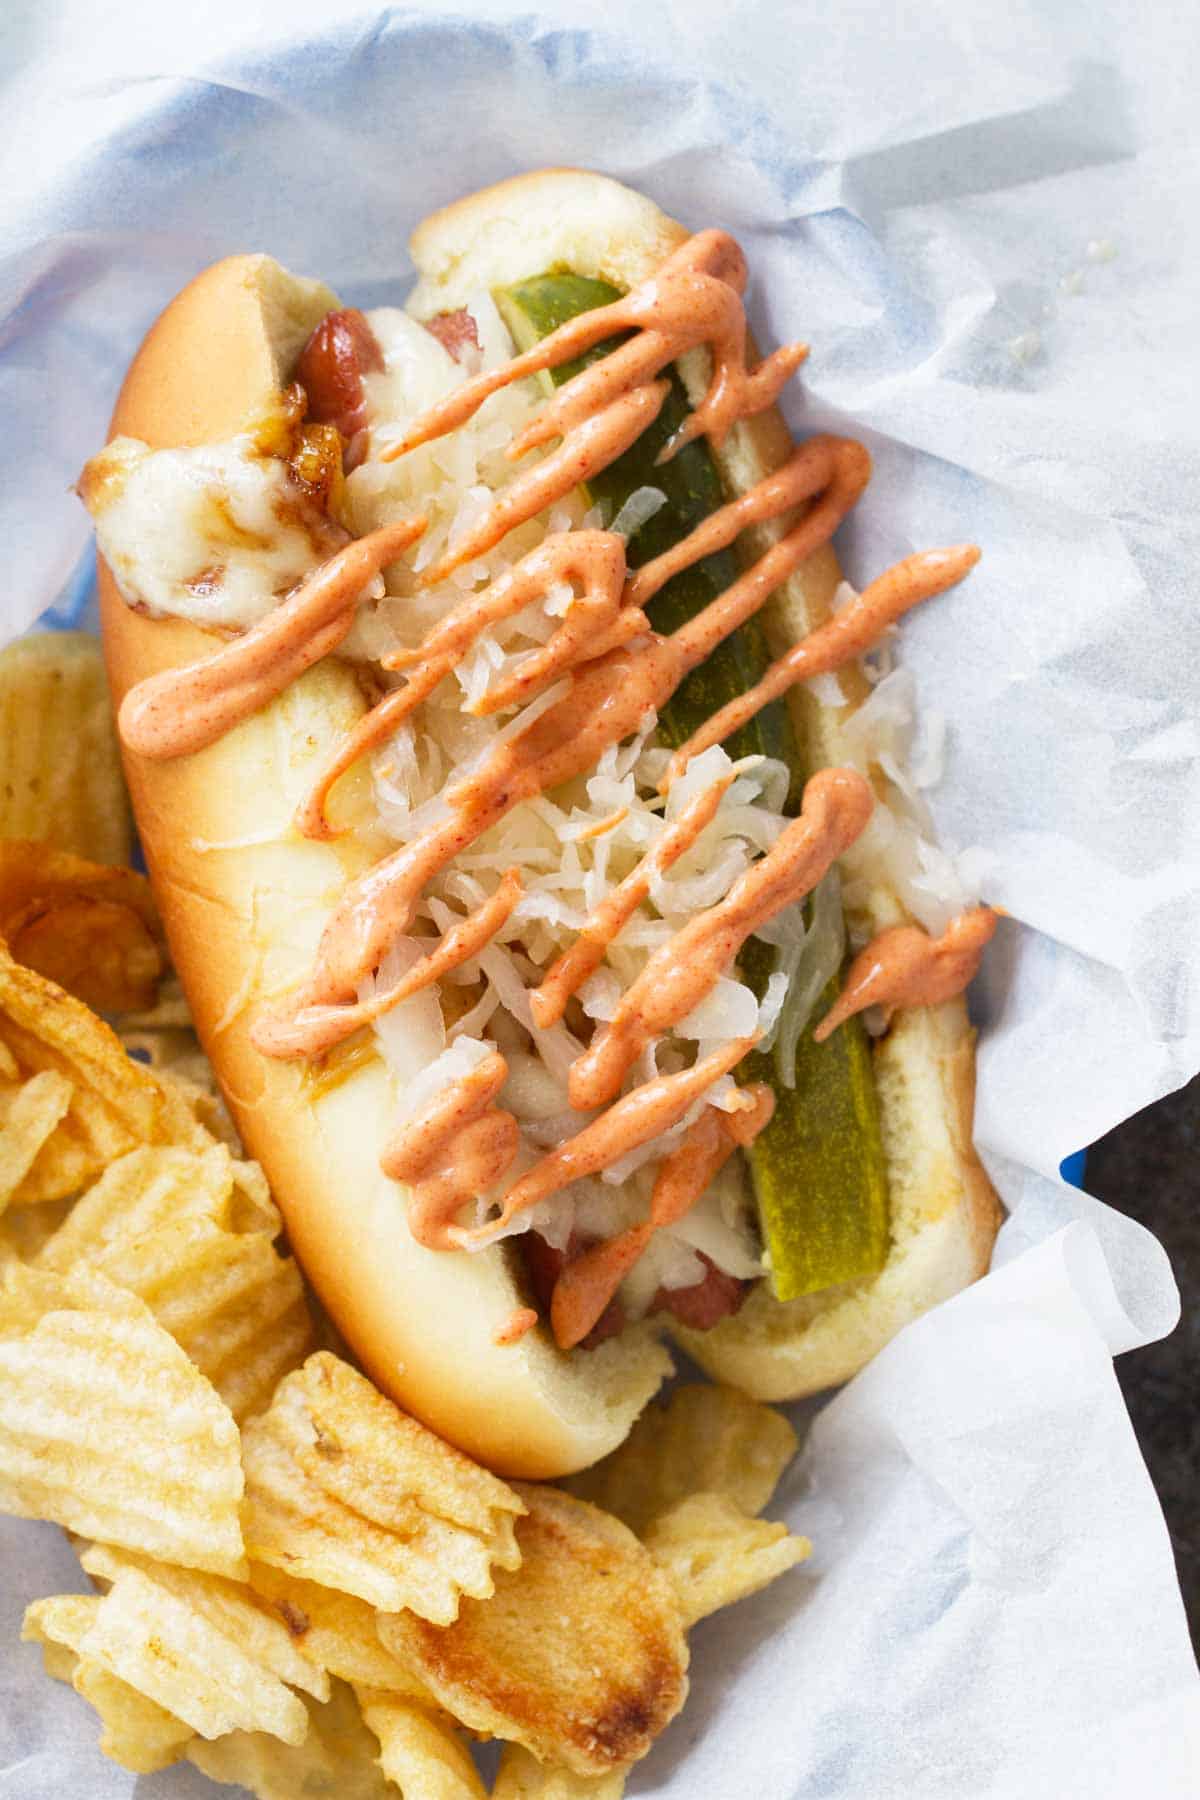 How to make Reuben Hot Dogs with homemade Russian dressing